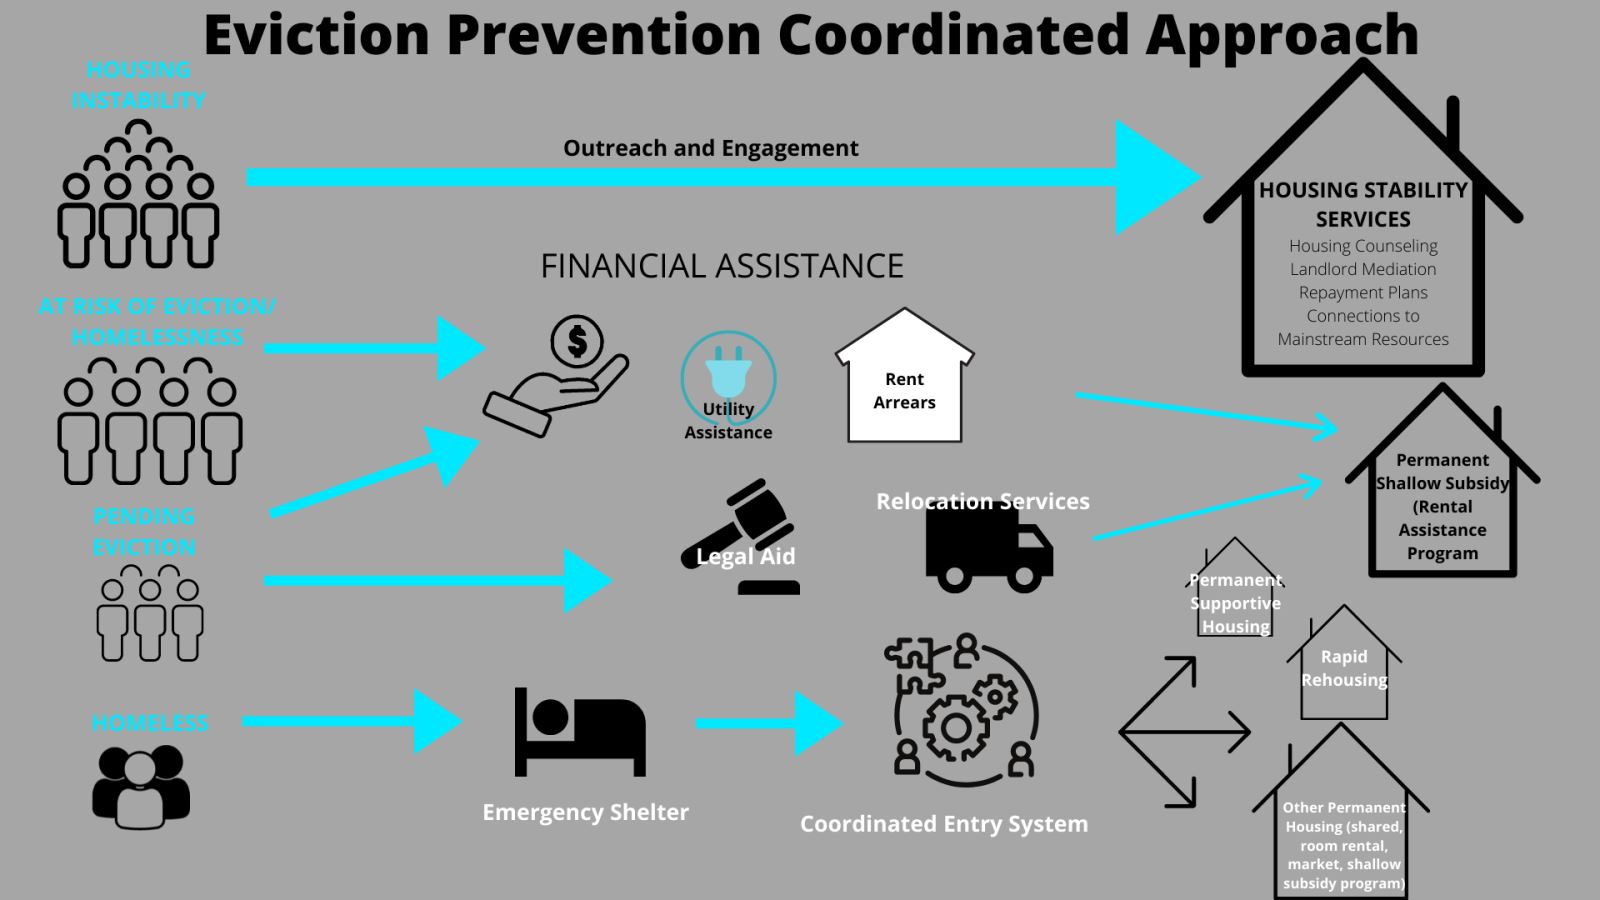 Eviction Prevention Coordinated Approach